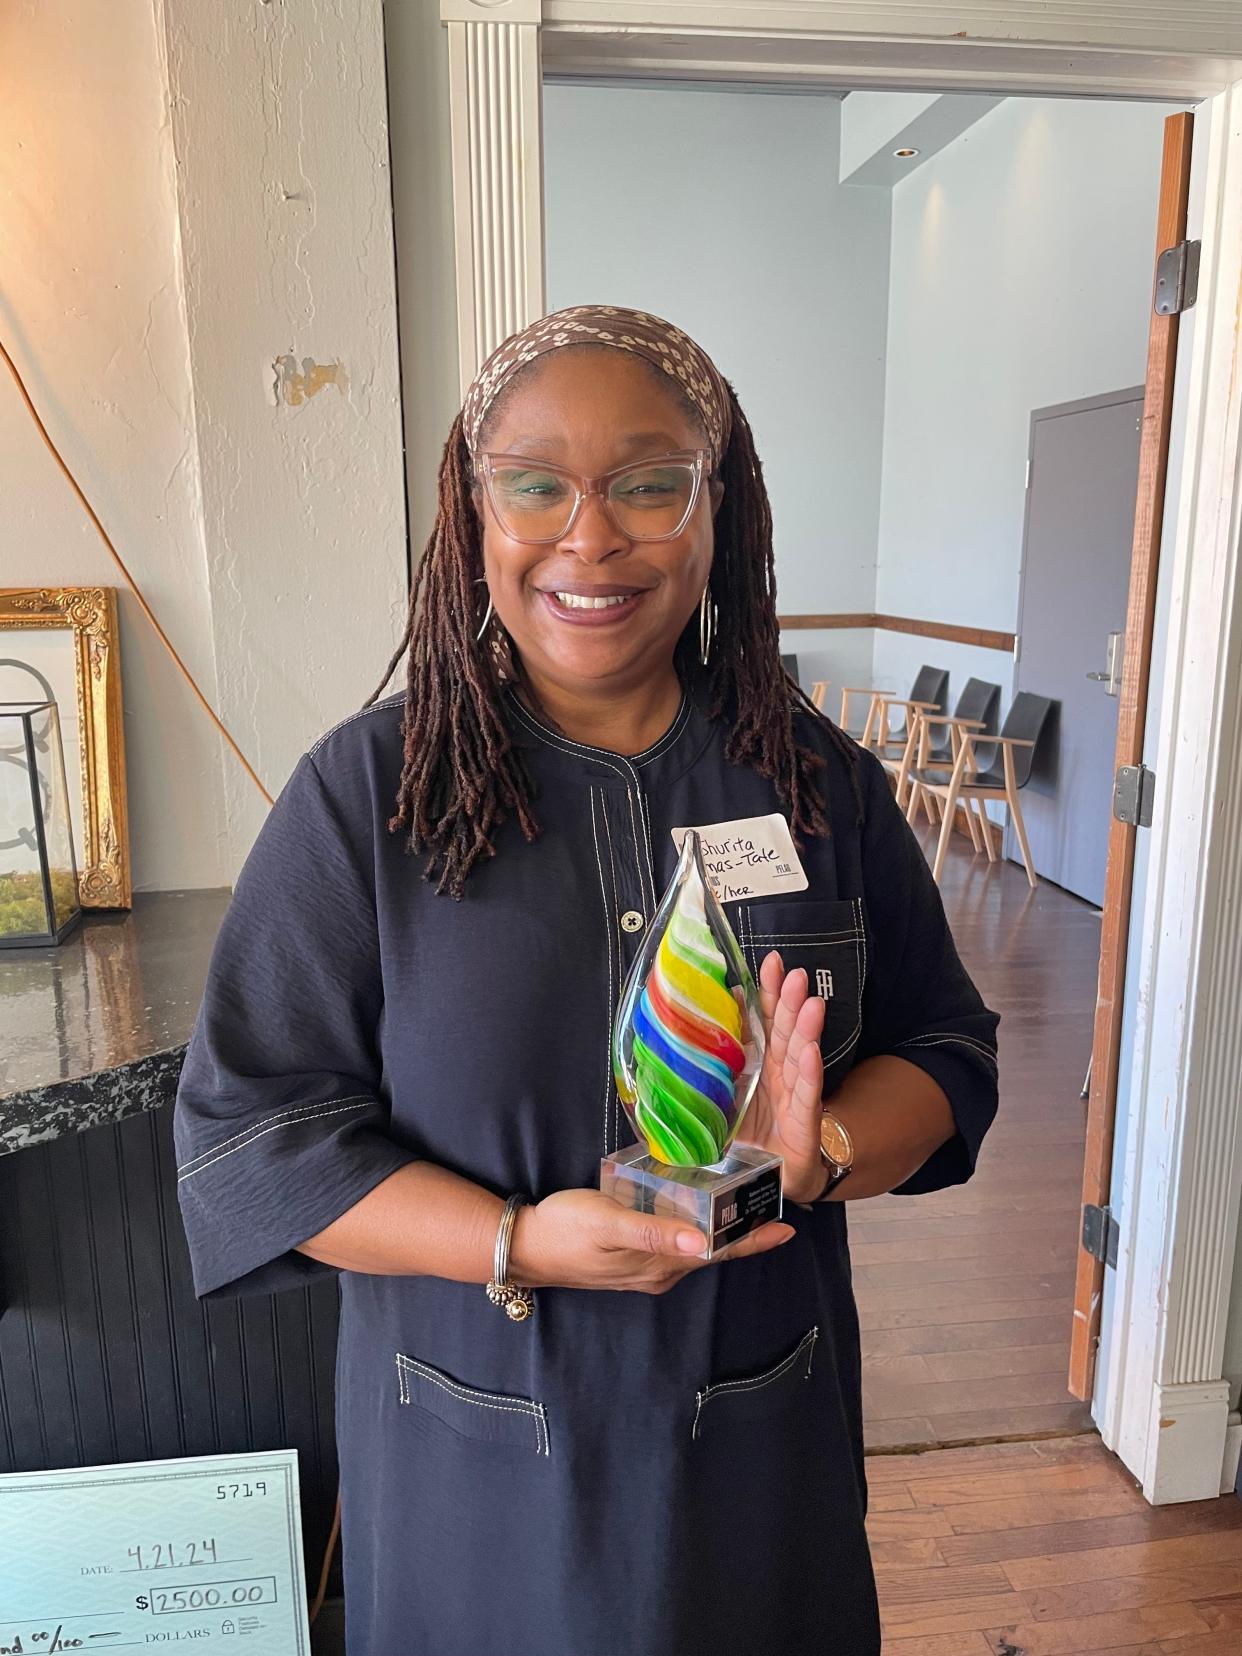 Dr. Shurita Thomas-Tate was awarded the Kathryn J. Munzinger Advocate of the Year Award by PFLAG Springfield/SWMO at a reception April 21 at Q Enoteca on Commercial Street.